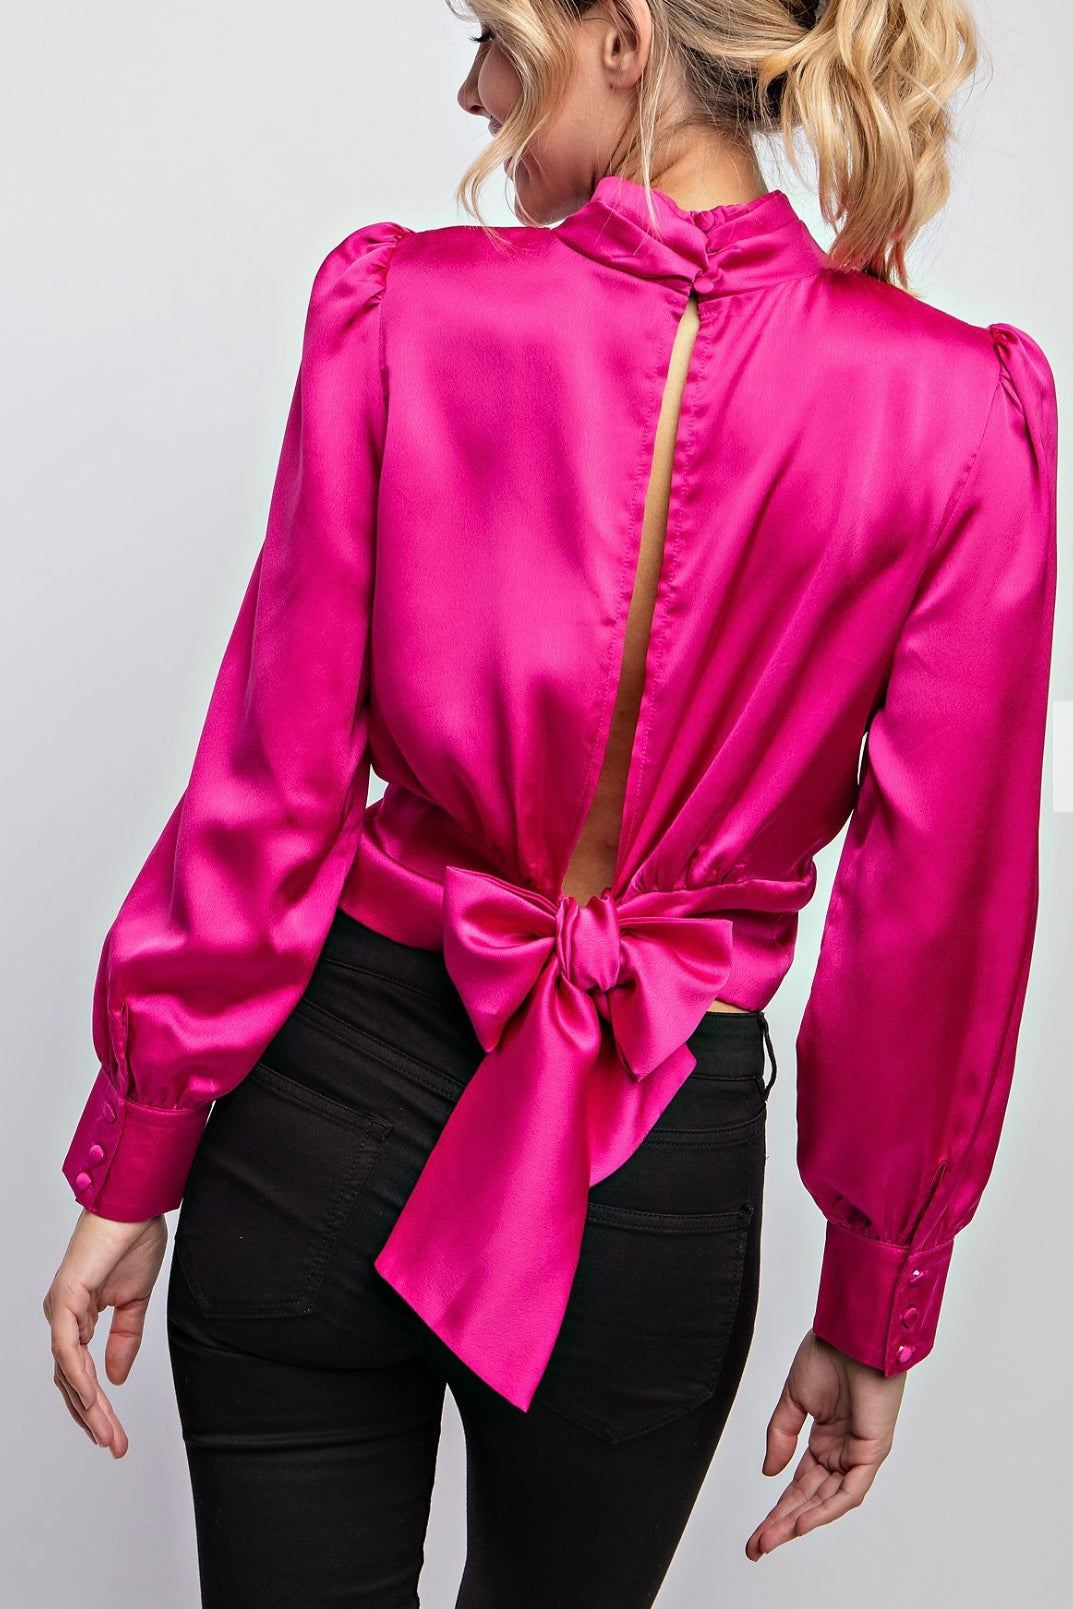 LONG SLEEVE SATIN TOP WITH TIE BACK